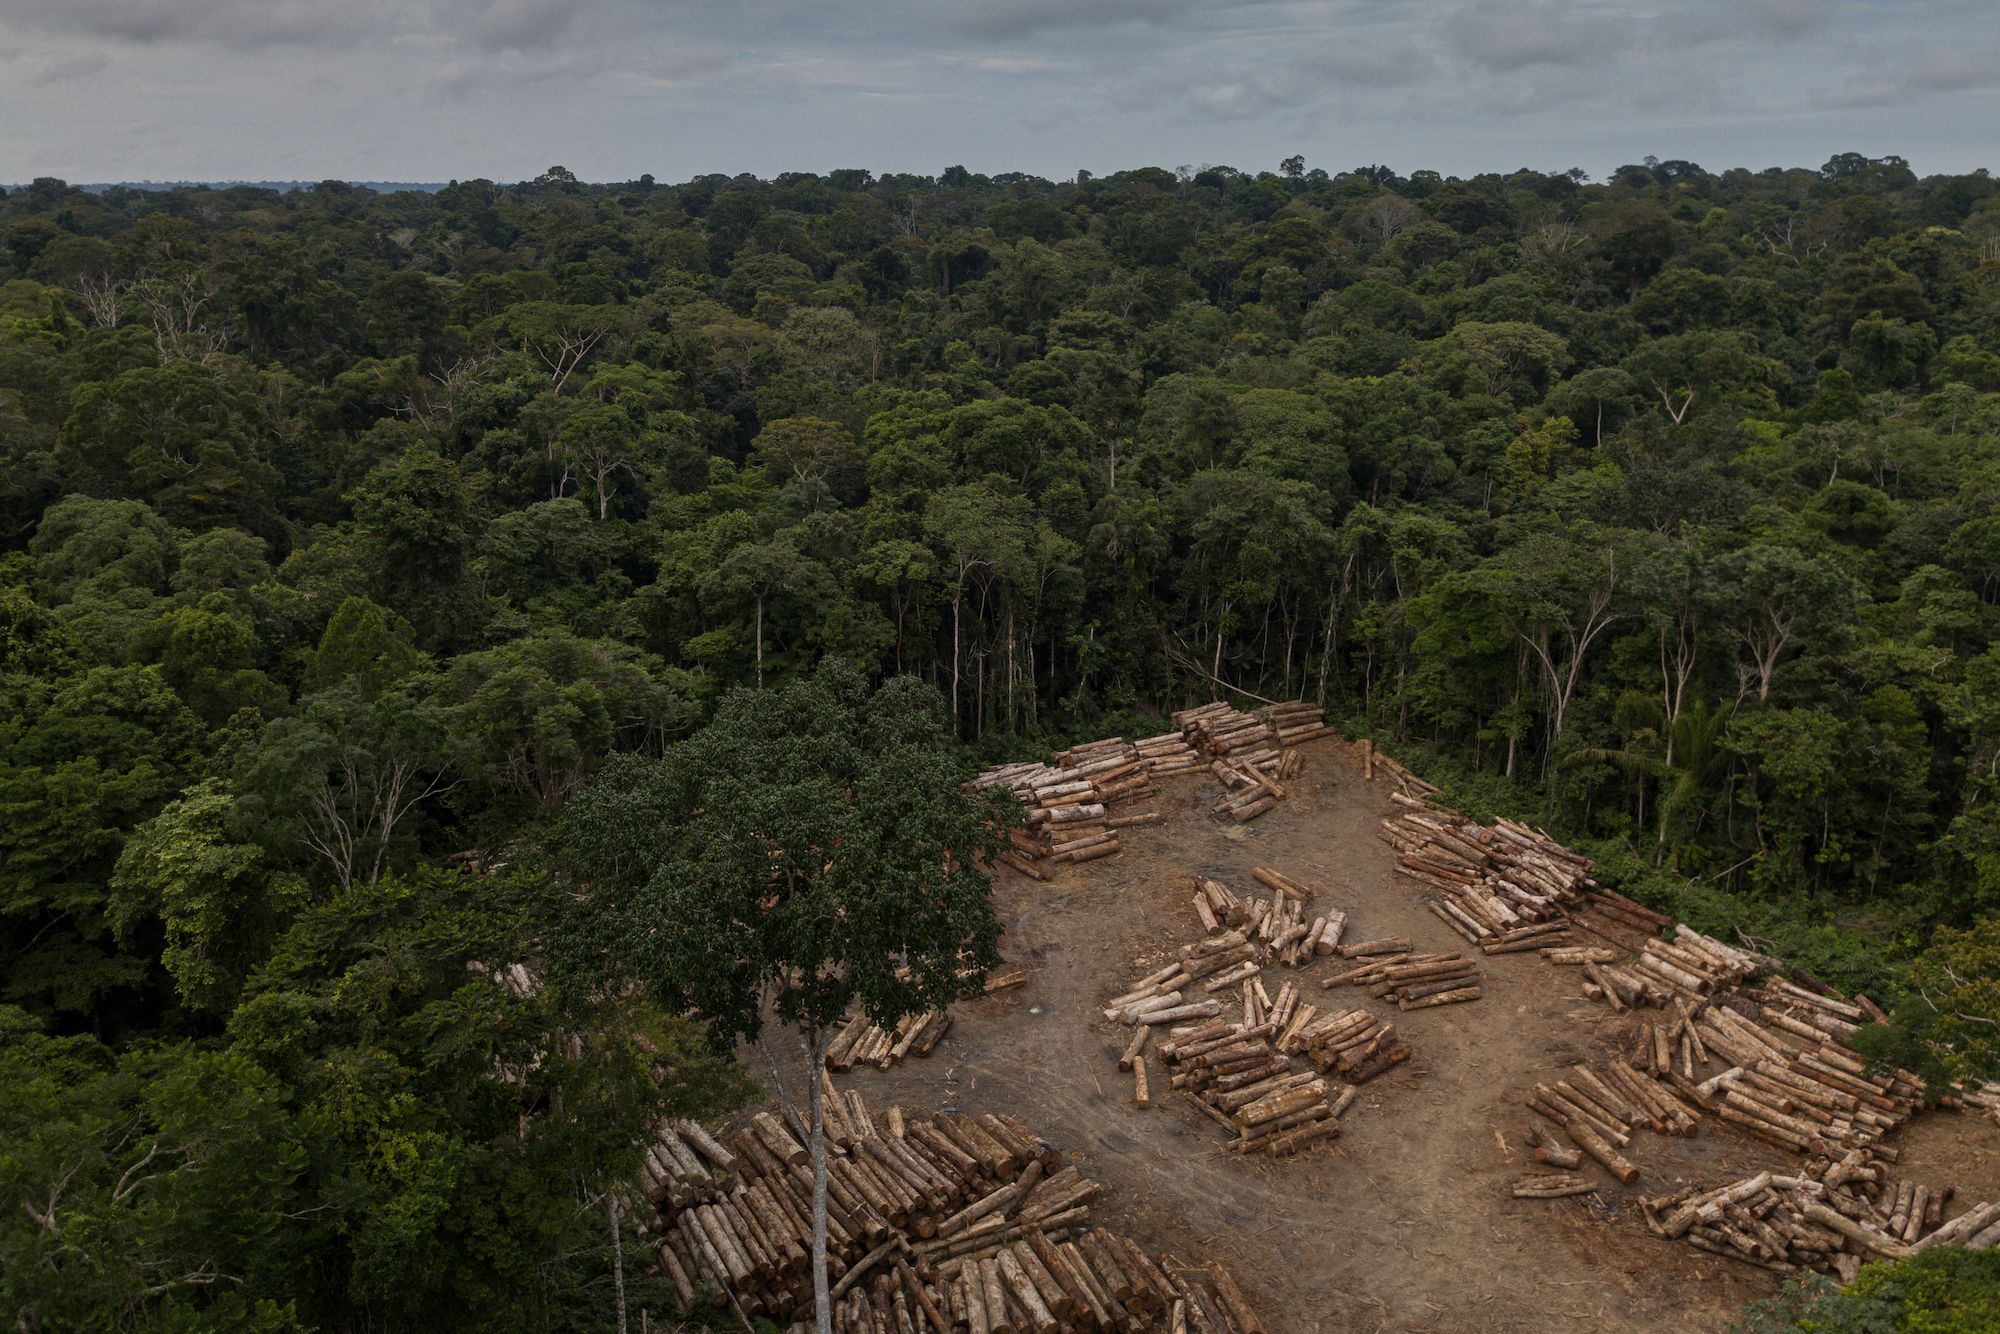 Timber from illegal logging is seized by inspectors from IBAMA, the national environmental protection agency, and stored in a yard in the lower Tapajós River region. Image by Flavio Forner. Brazil, undated.